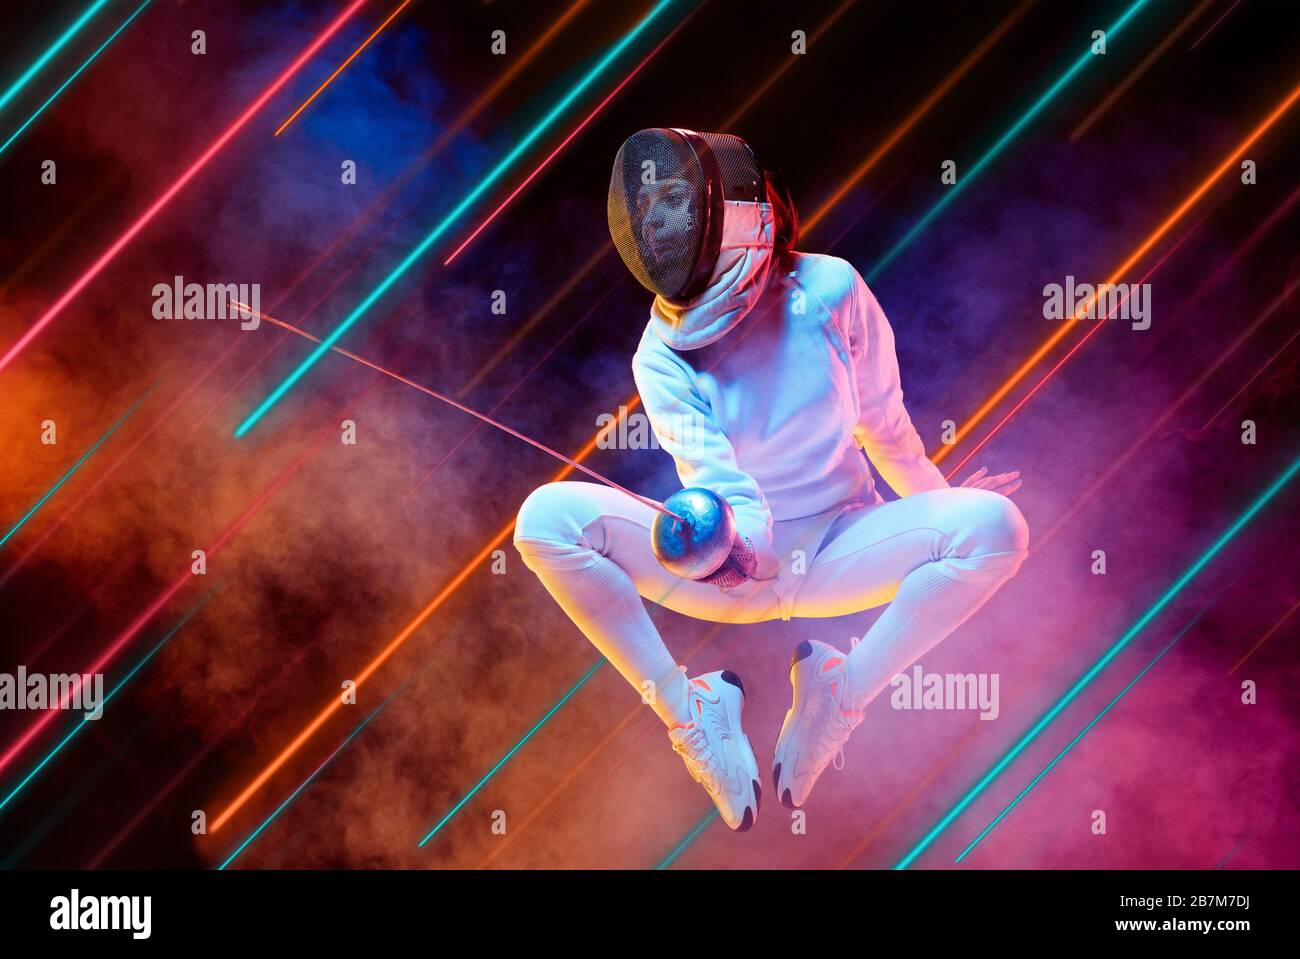 Creative Sport And Neon Lines On Dark Background Flyer Proposal Female Fencing Player Training In Action And Motion Concept Of Hobby Healthy Lifestyle Youth Action Movement Modern Style Stock Photo Alamy